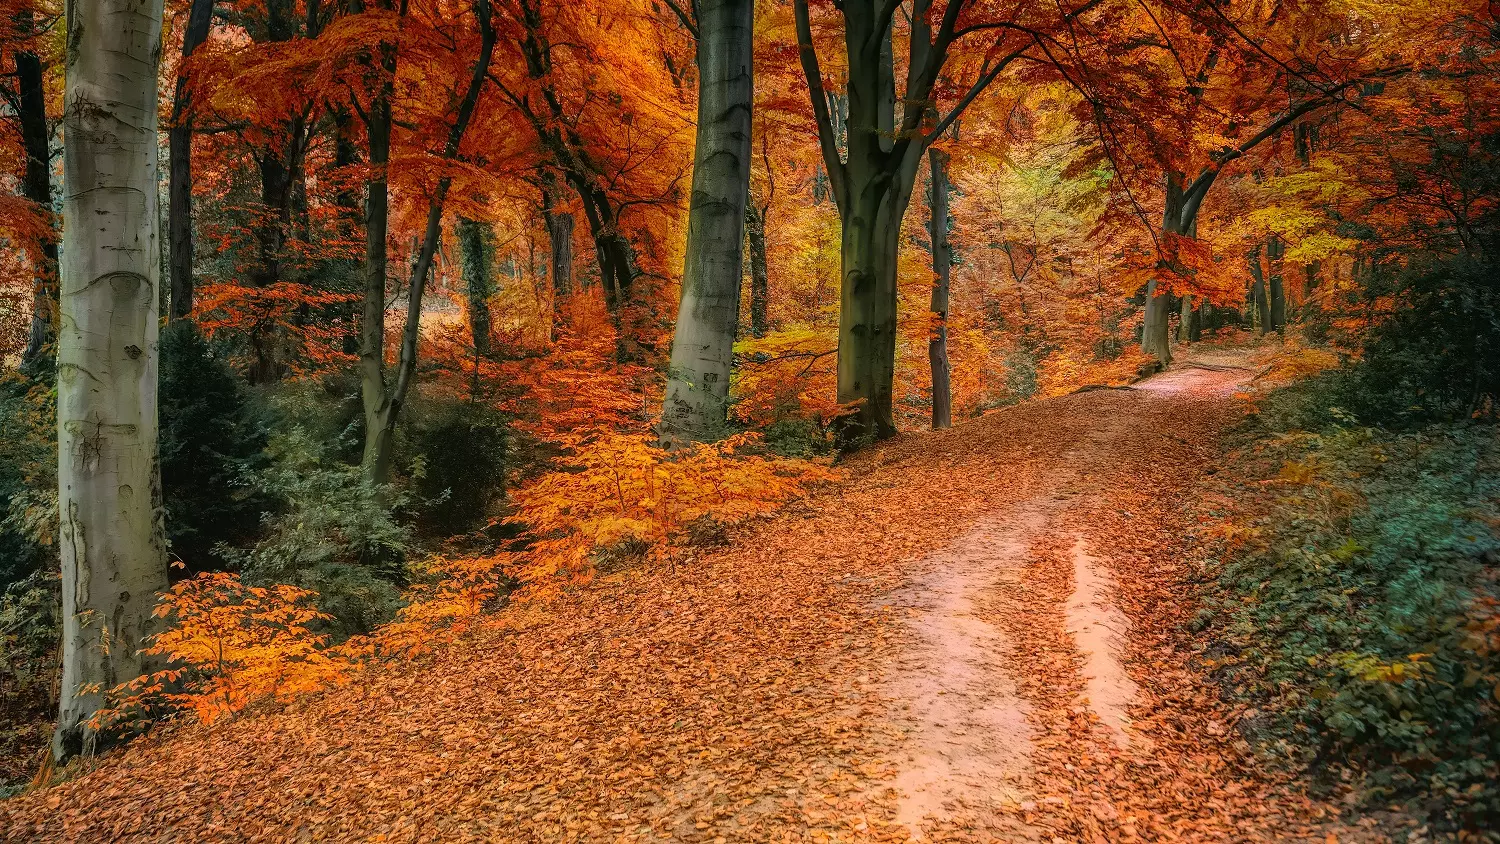 Autumn forest with leave covered path, photo credit: Johannes Plenio at Pexels